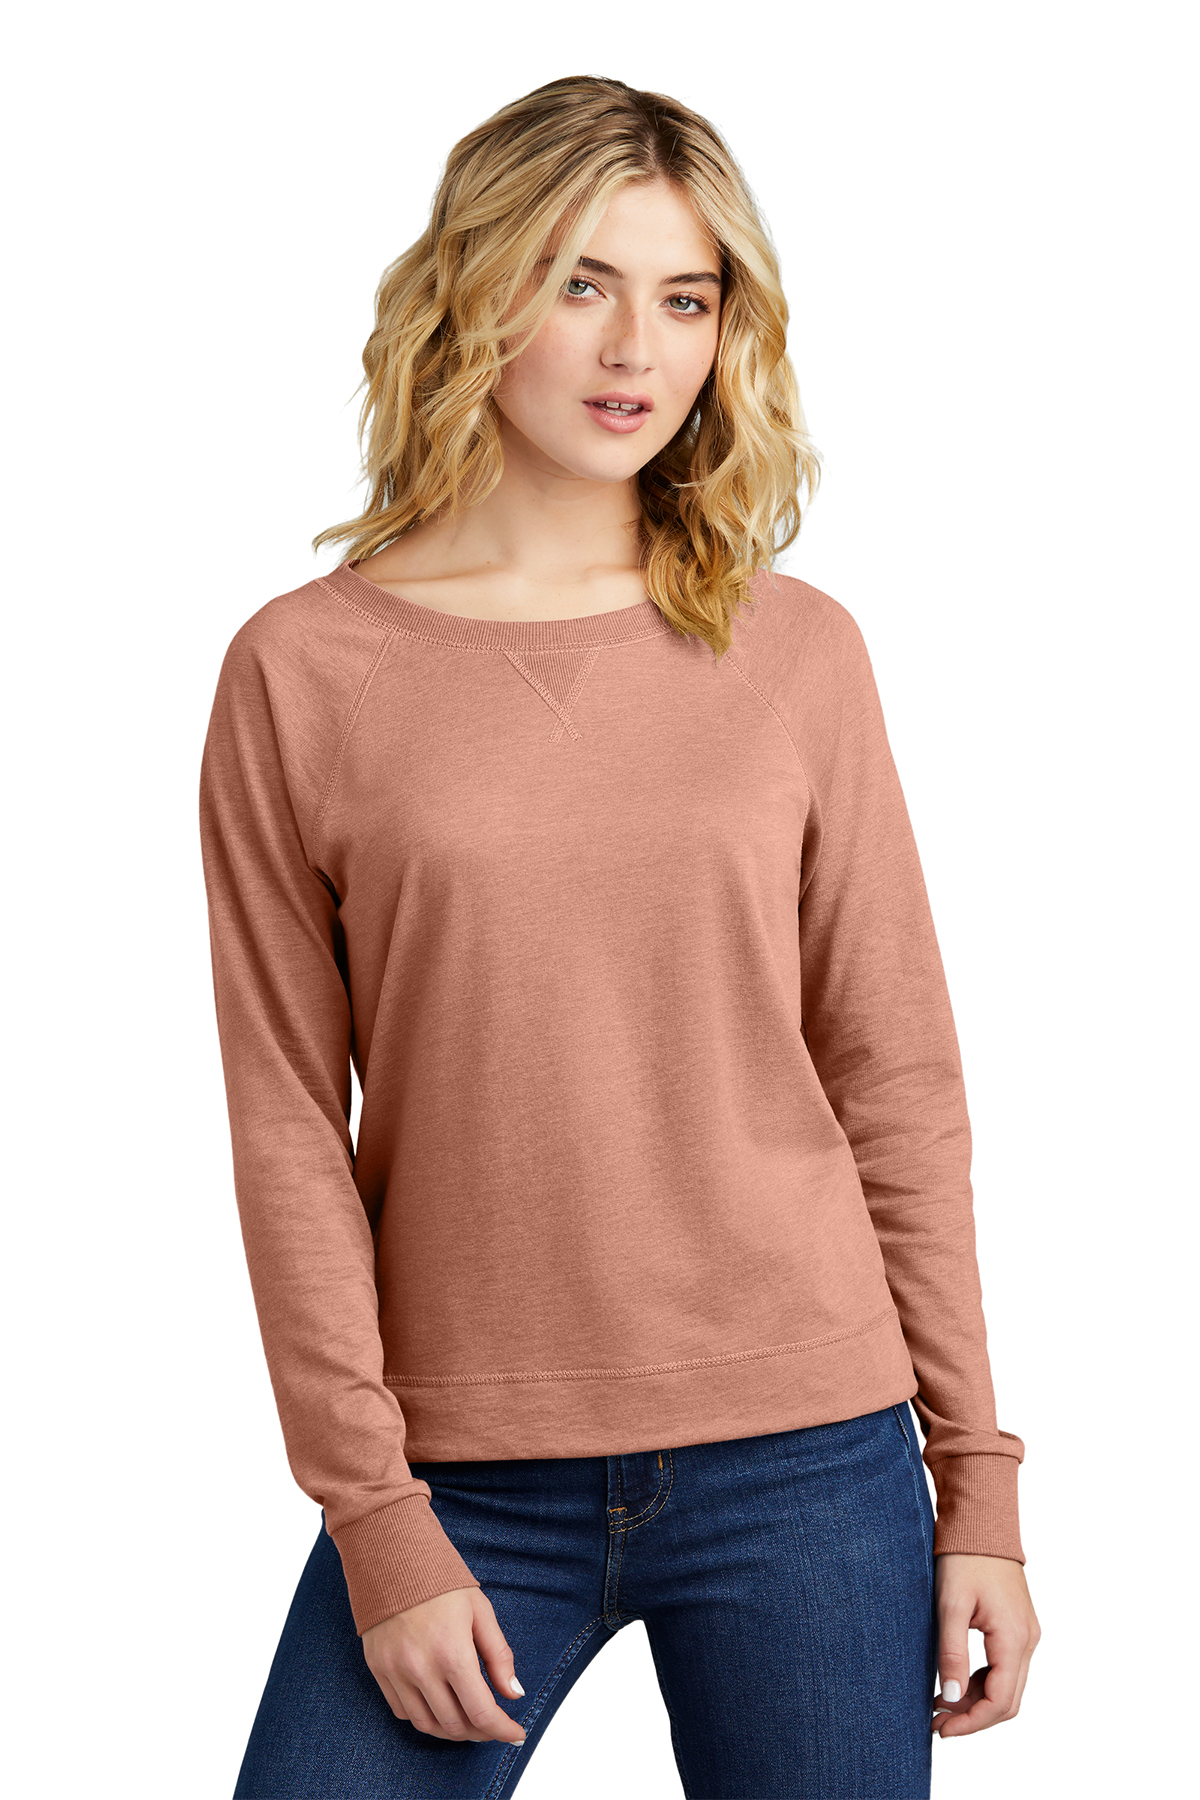 District DT672 - Women's Featherweight French Terry™ Long Sleeve Crewneck